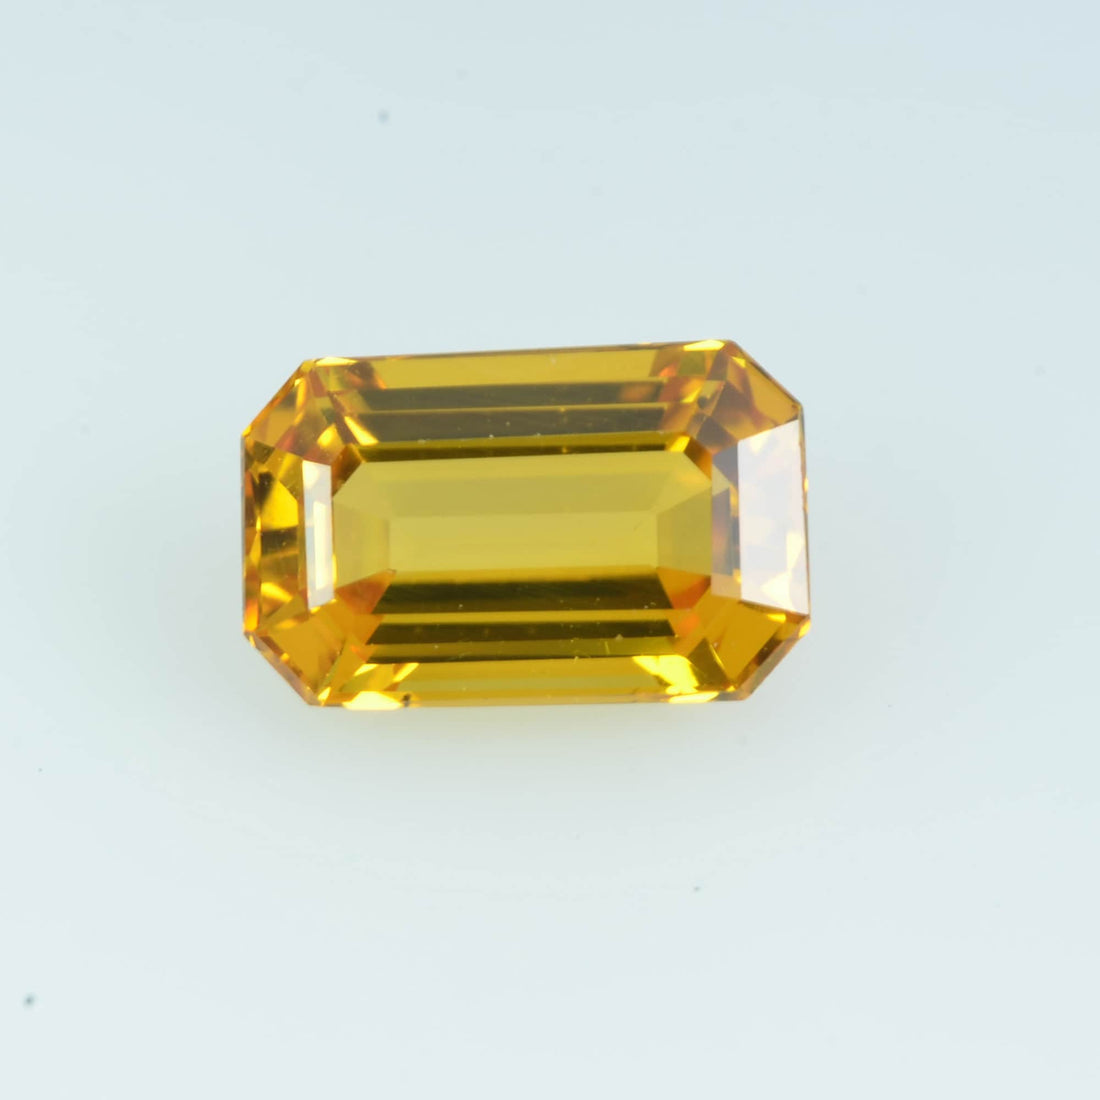 0.97 cts Natural Yellow Sapphire Loose Gemstone Octagon Cut